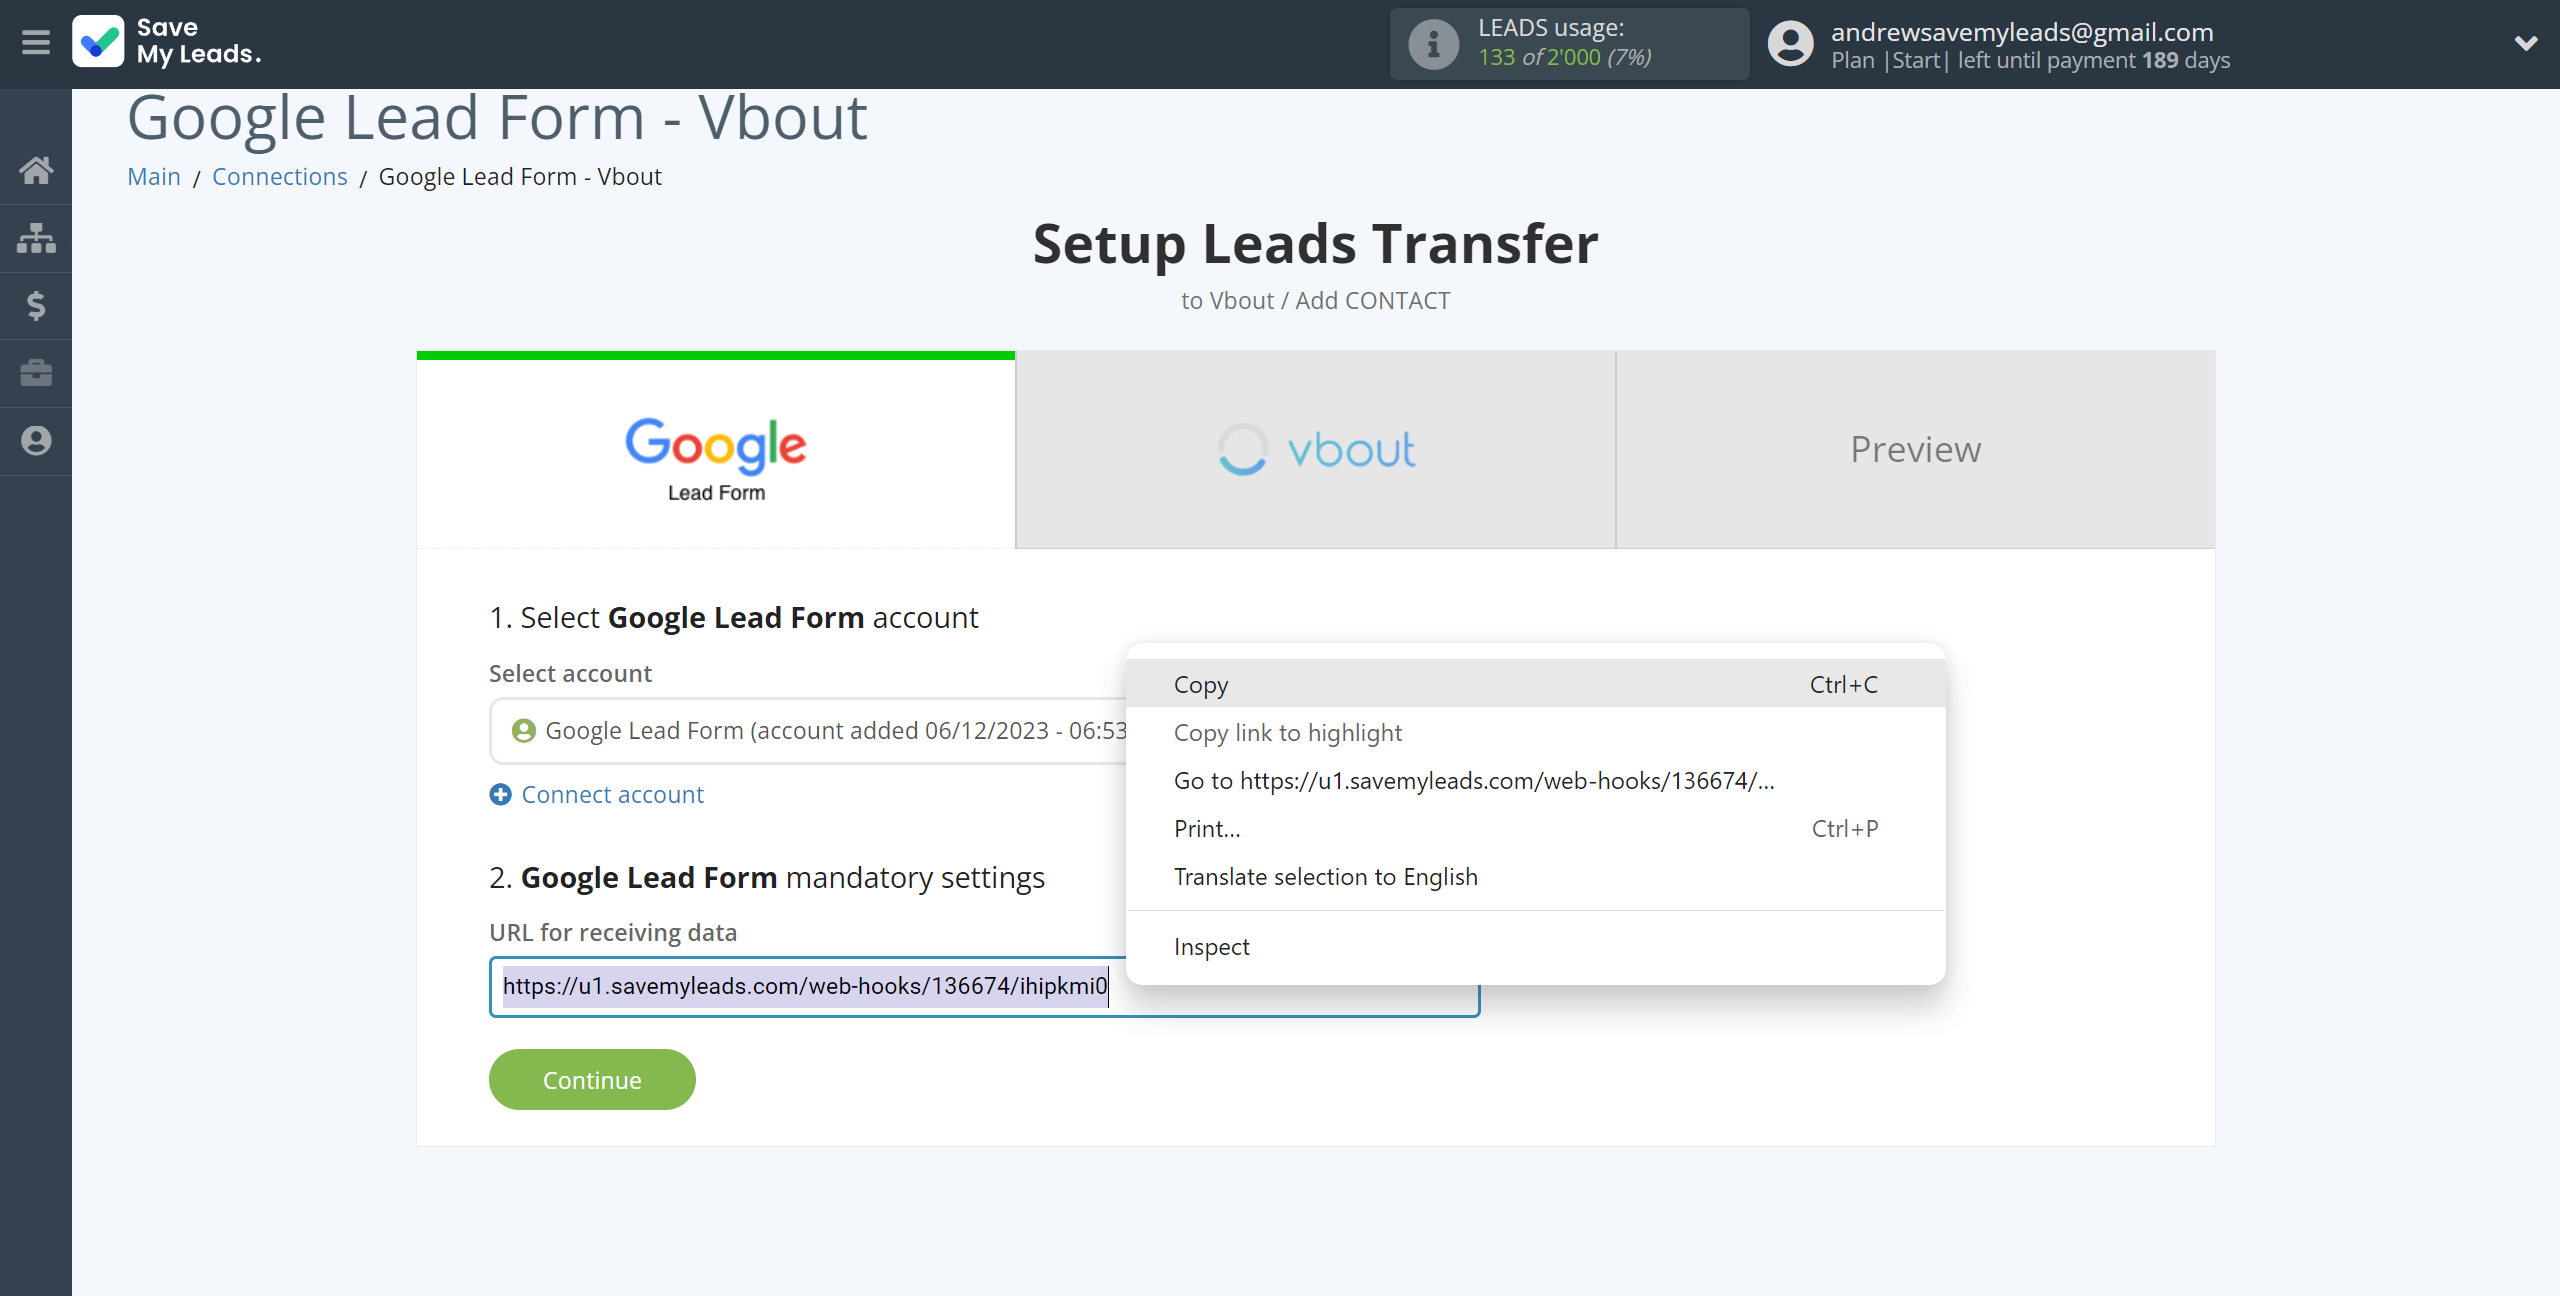 How to Connect Google Lead Form with Vbout Add Contact | Data Source account connection